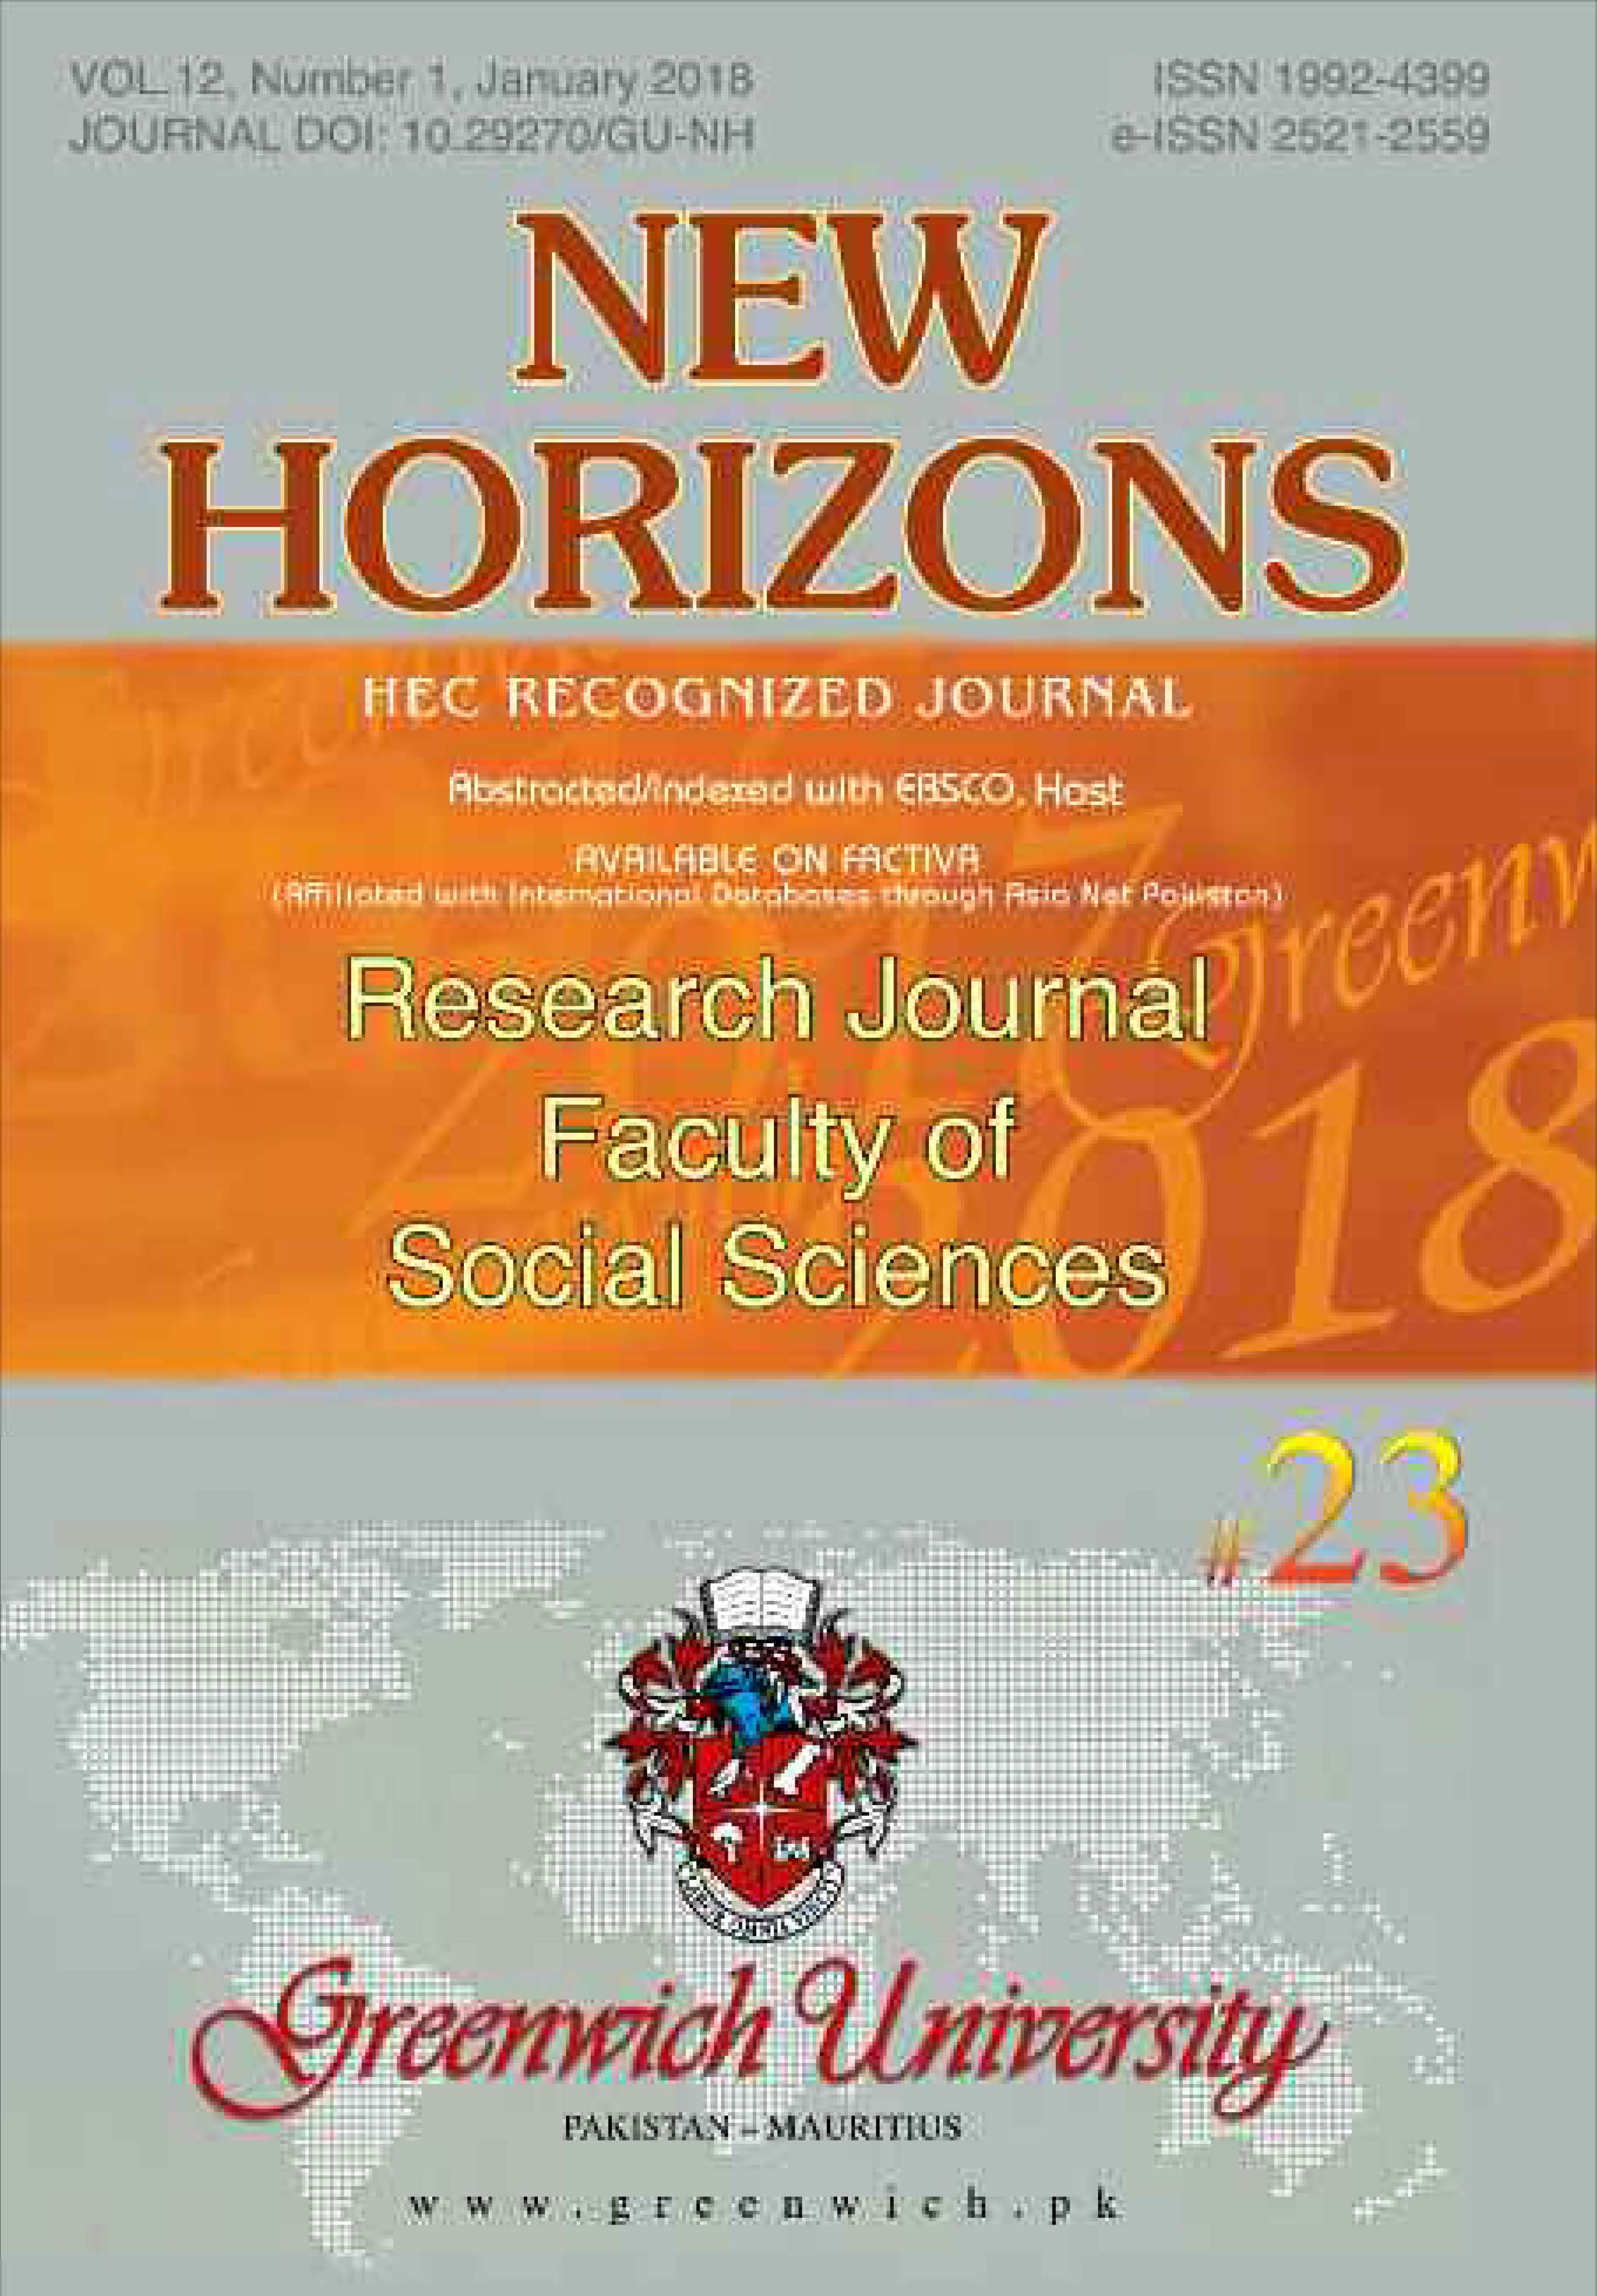 					View Vol. 12 No. 1 (2018): New Horizons (January'18) Issue No. 23
				